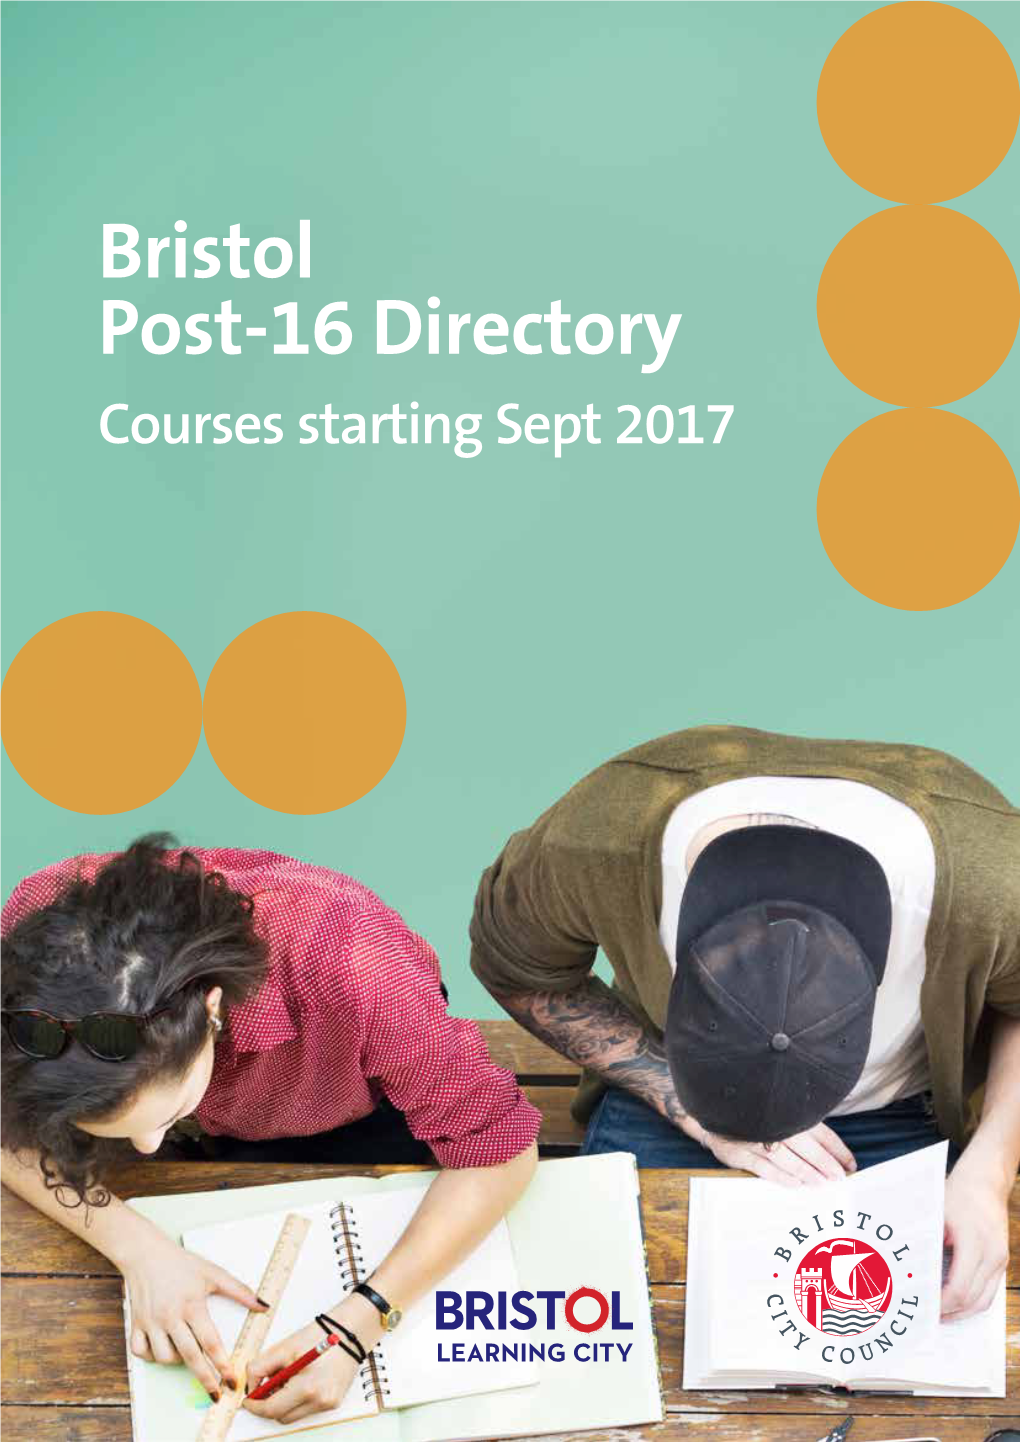 Bristol Post-16 Directory Courses Starting Sept 2017 Contentswelcome to the Bristol Post-16 Directory